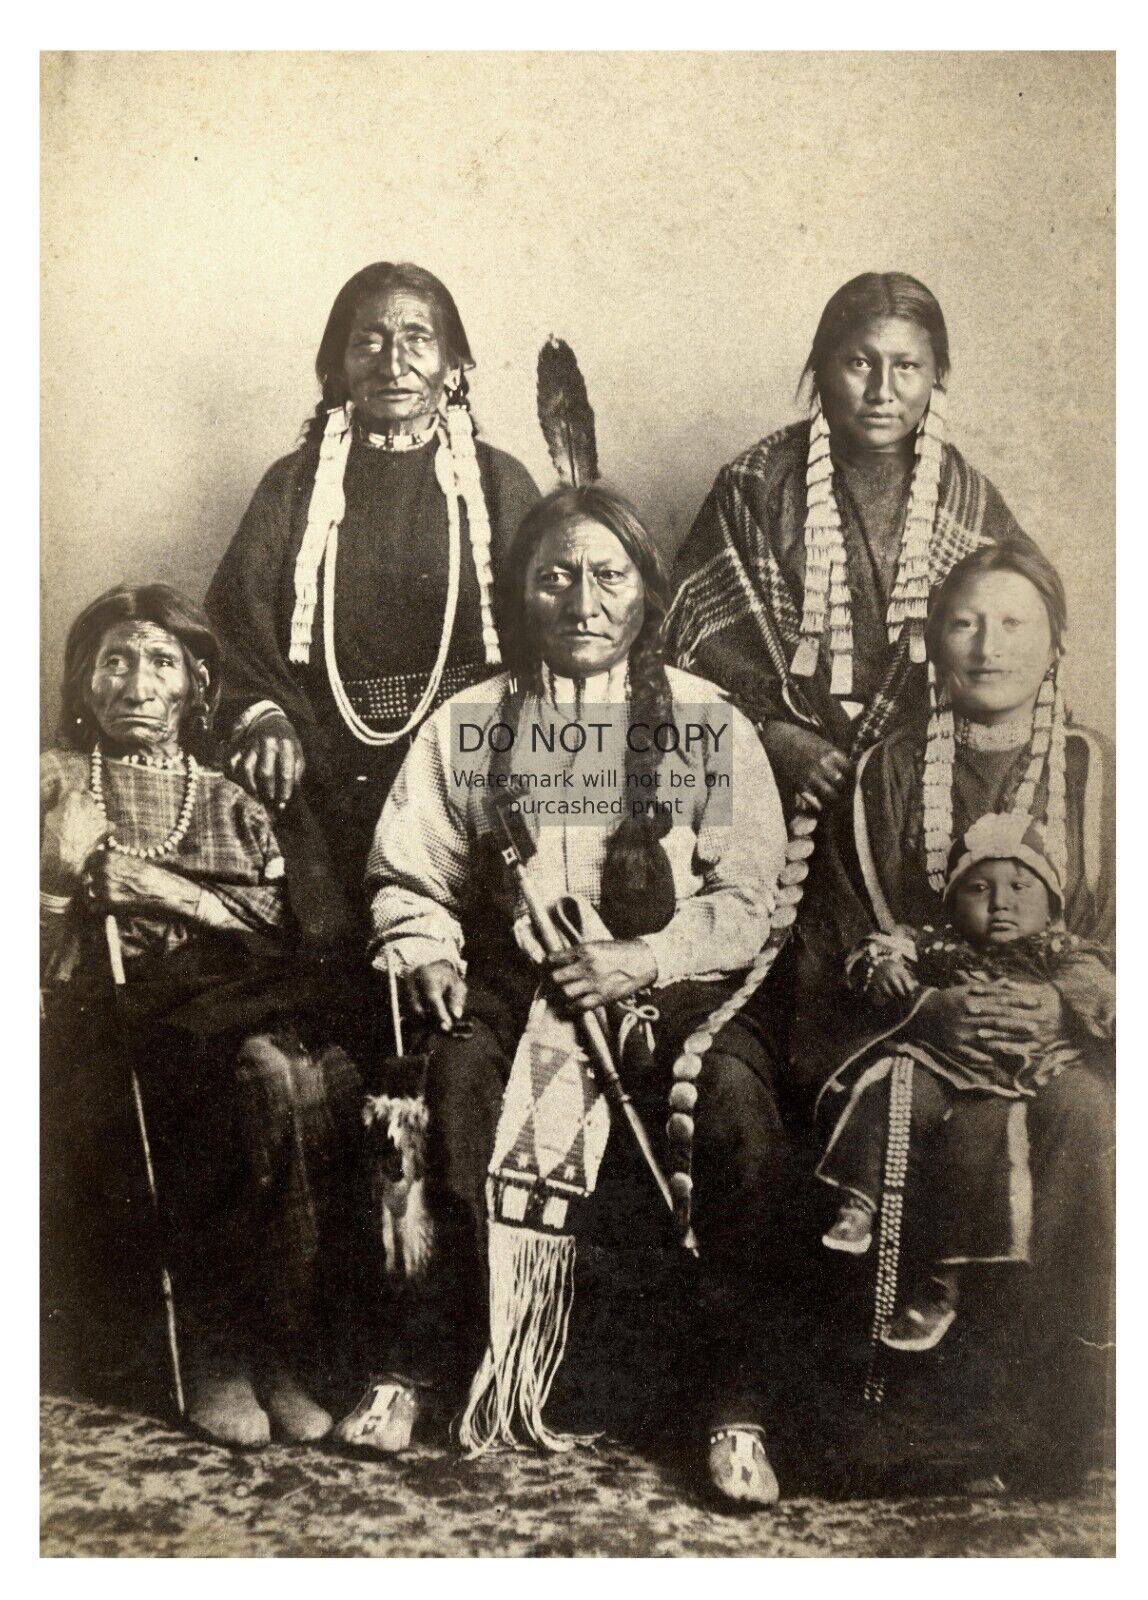 CHIEF SITTING BULL AND HIS FAMILY NATIVE AMERICANS 5X7 PHOTO